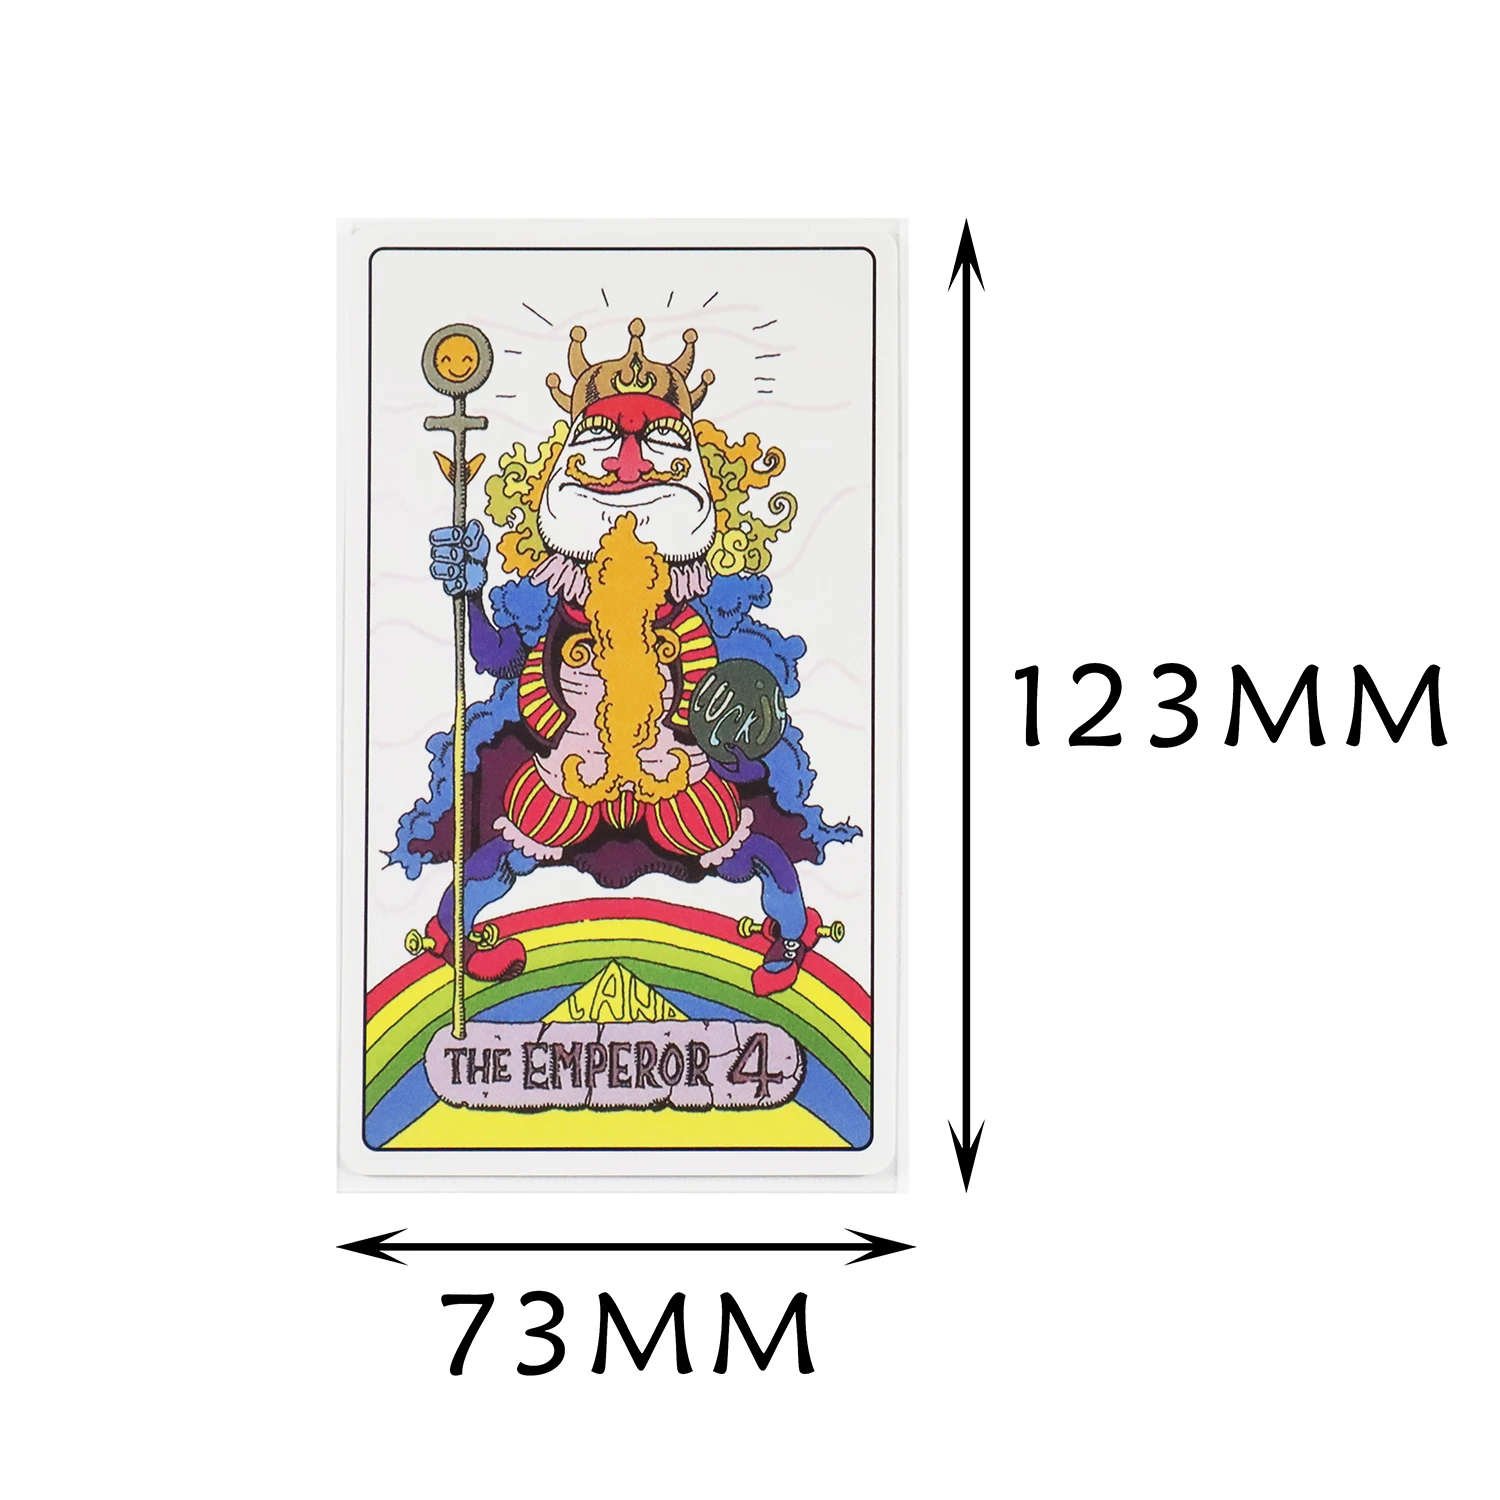 80 PCS/Lot Acid Free Premium Matte Clear Back Tarot Cards Sleeves 73x123mm Oracle Deck Board Game Cards Protector Cover Shield 100pcs card sleeves photcards clear protector kpop shield board games tarot cards three kingdoms poker multi size toploader